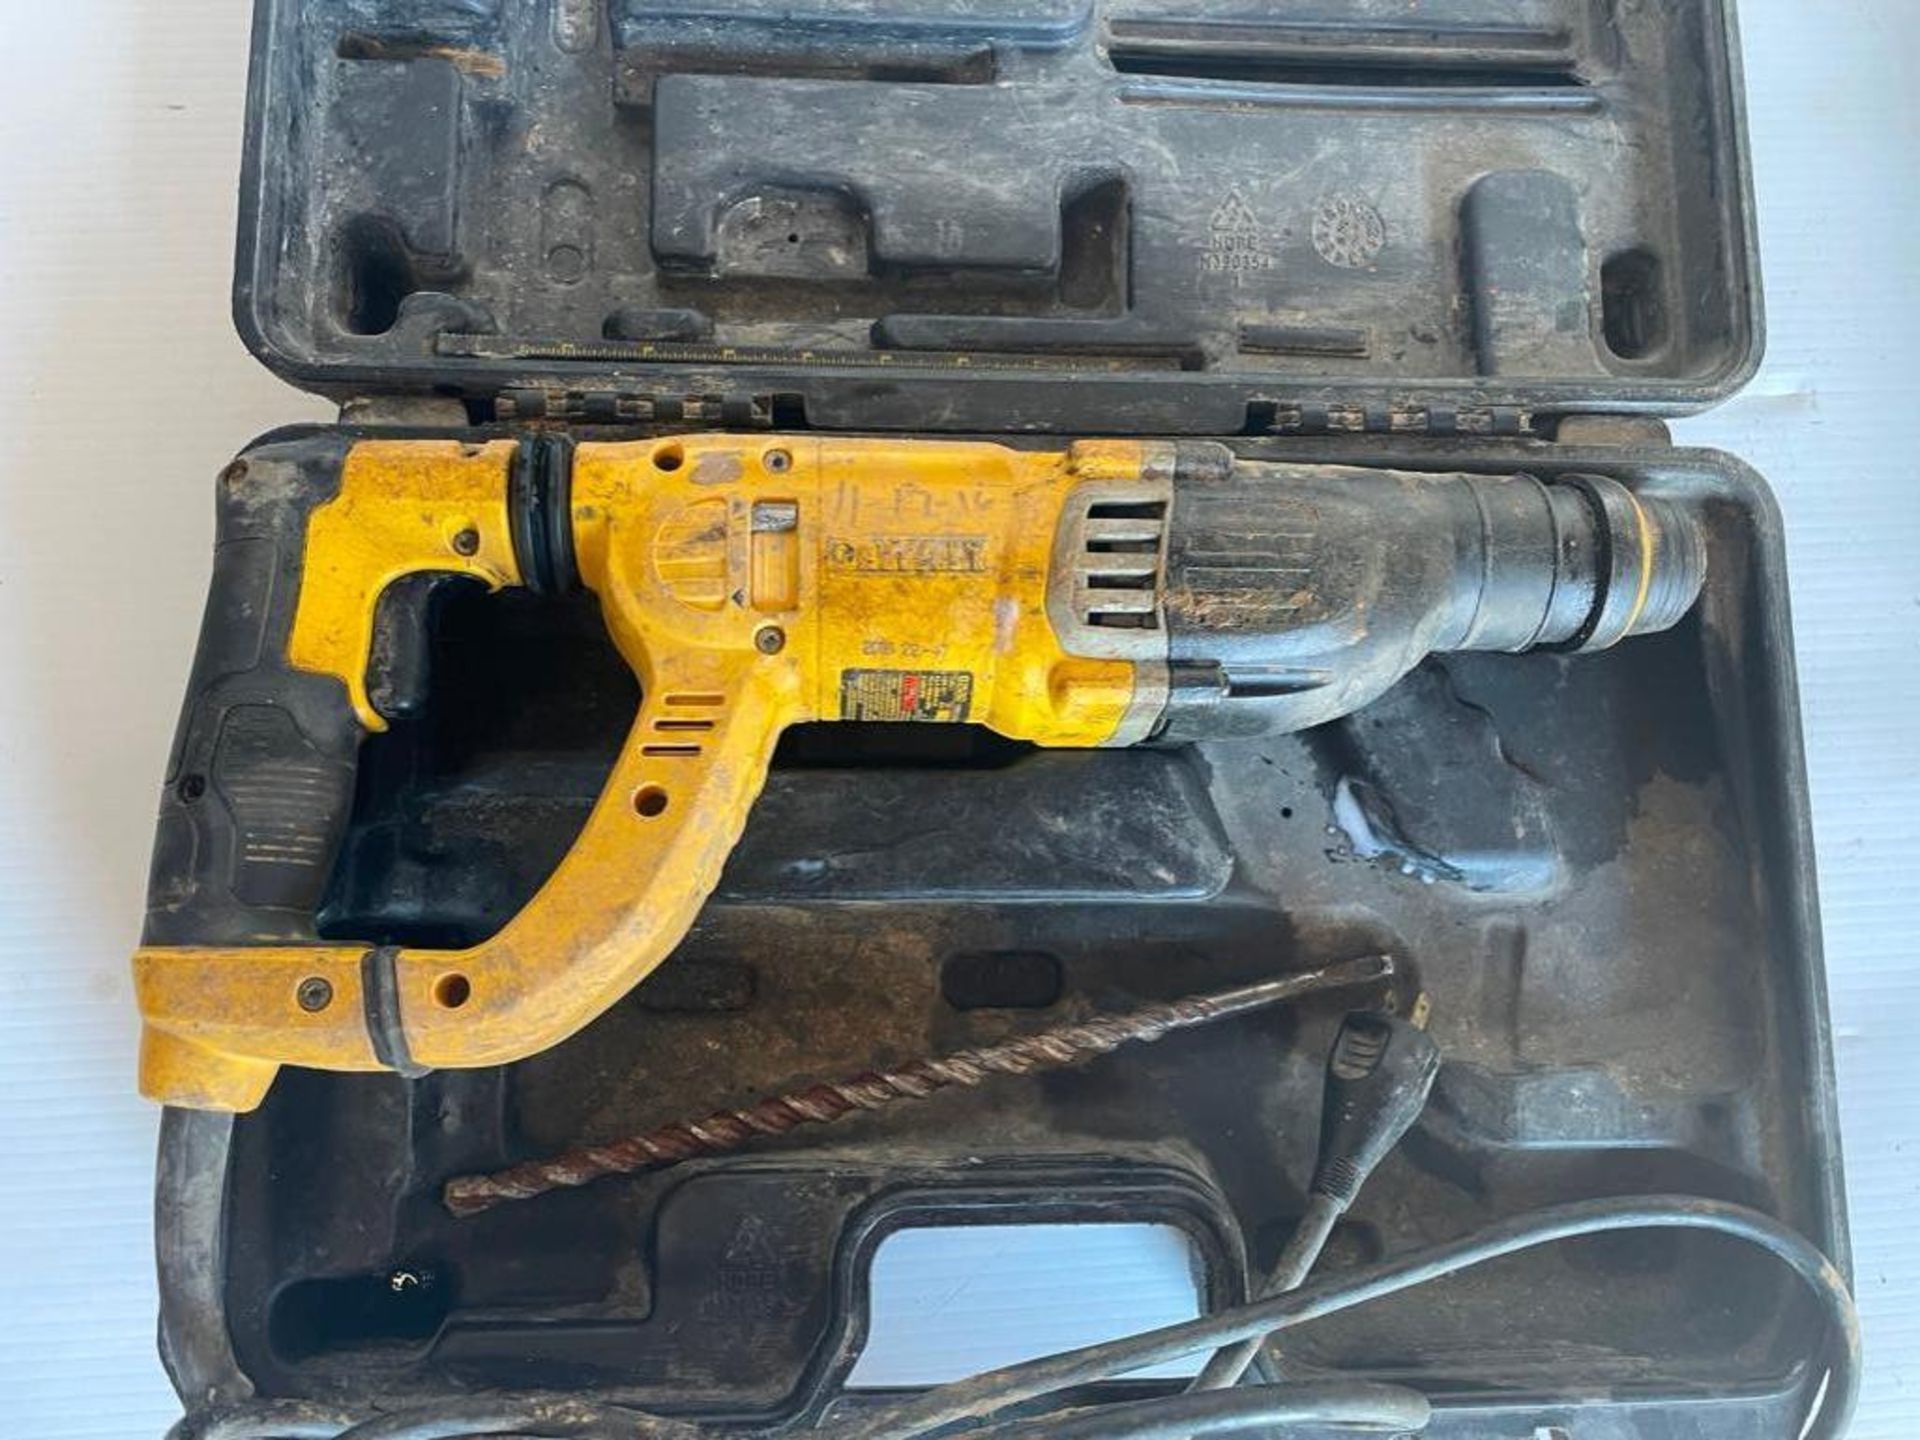 DeWalt D25263 Hammer Drill, Serial #045783, 120V in Case. Located in Hazelwood, MO - Image 3 of 4